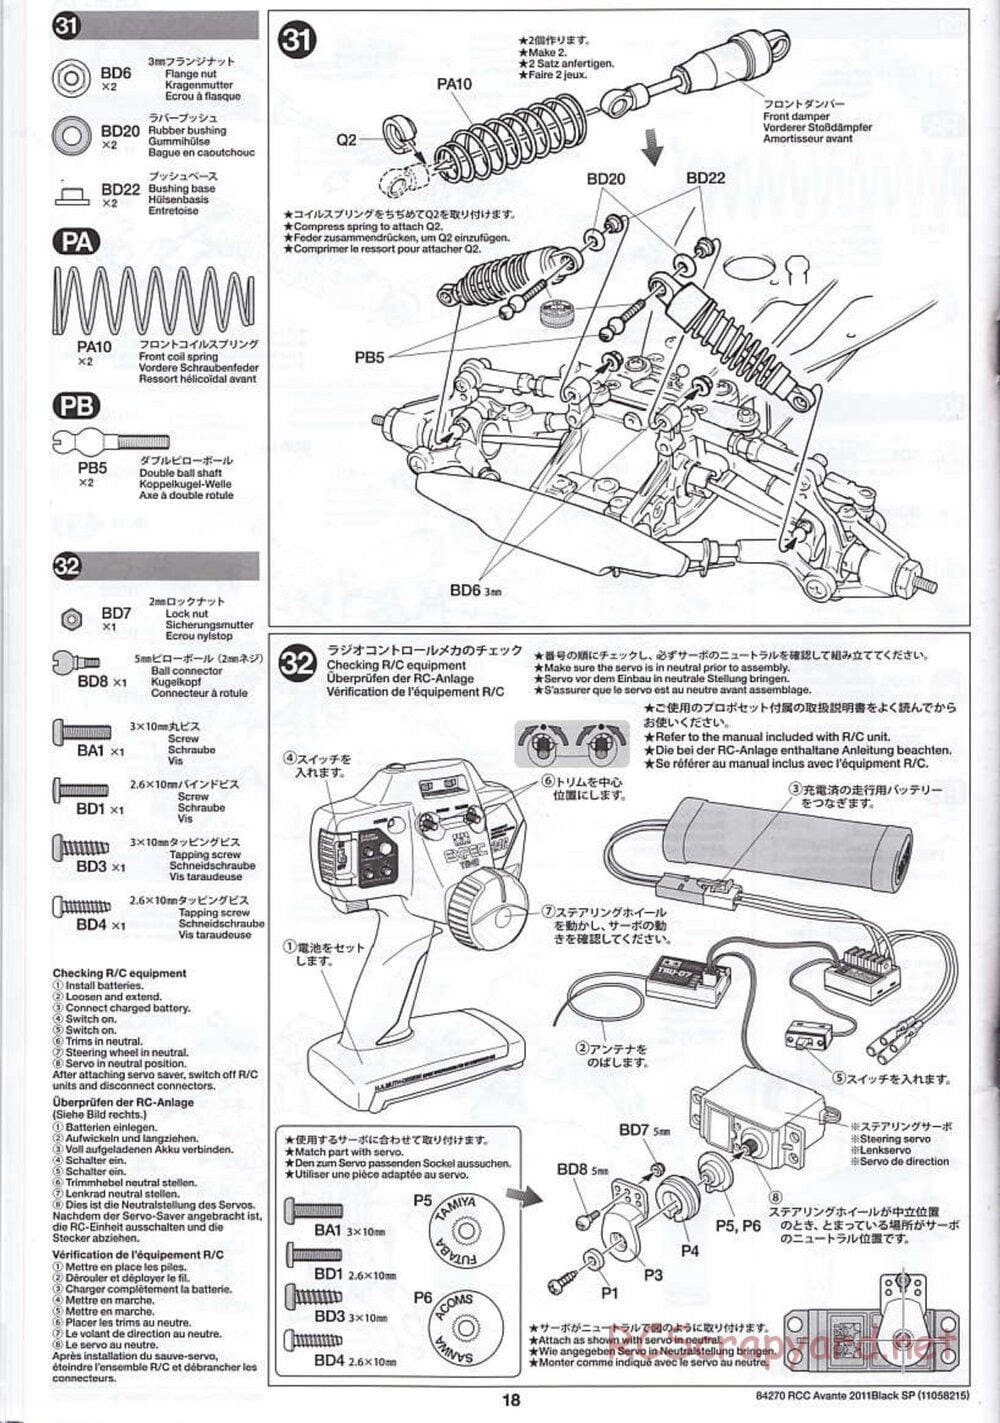 Tamiya - Avante 2011 - Black Special Chassis - Manual - Page 18